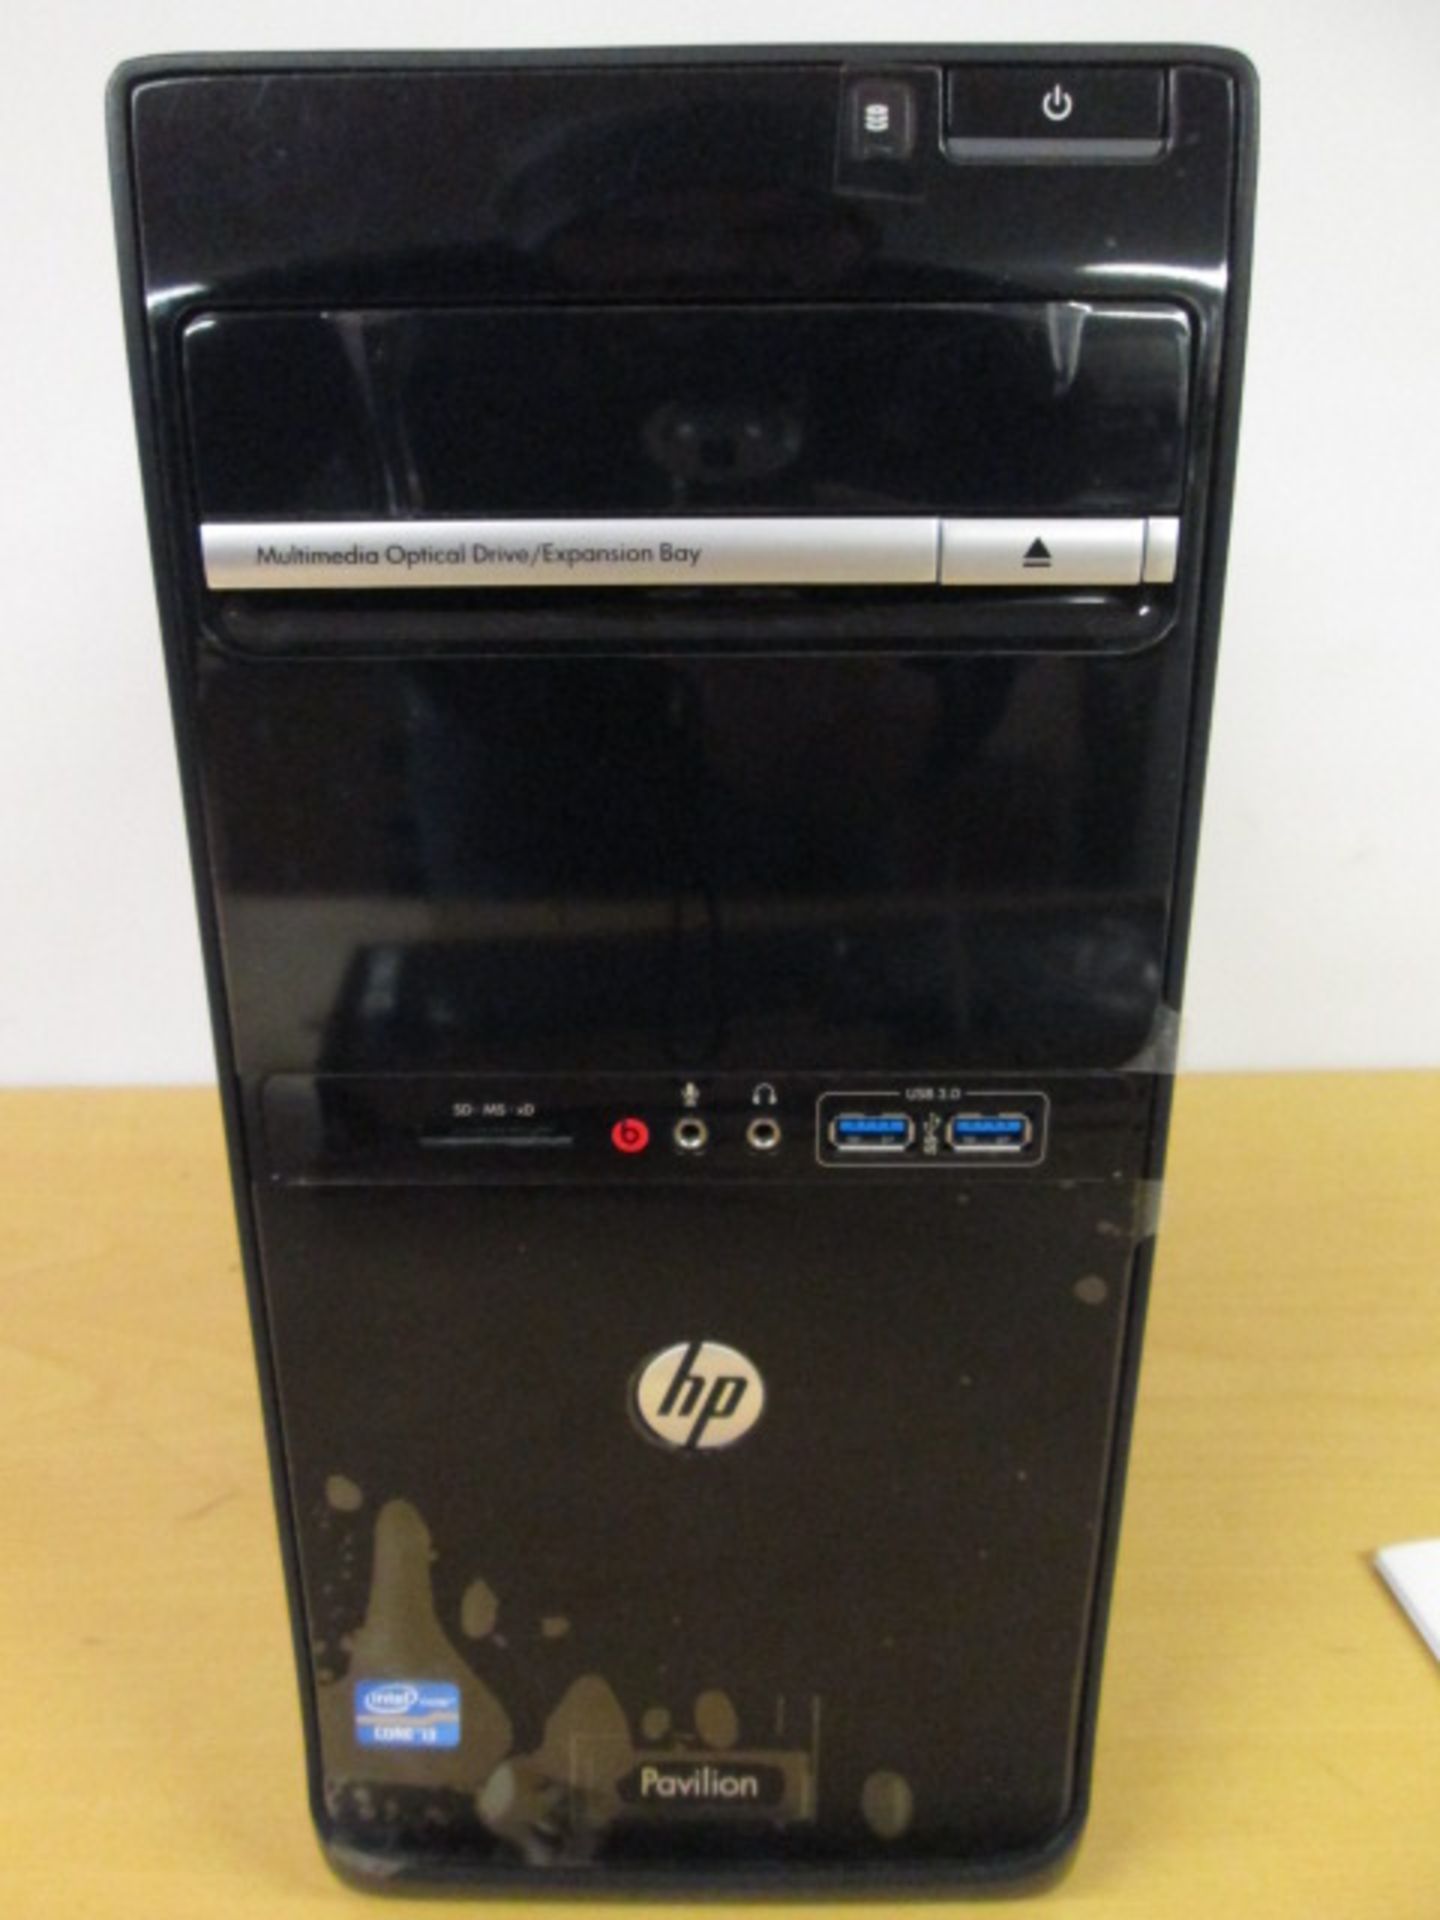 HP Pavilion P6 Series PC, Model P6-2370ea, Product Number C3T68EAABU, Serial Number CZC2408NZ6, - Image 2 of 2